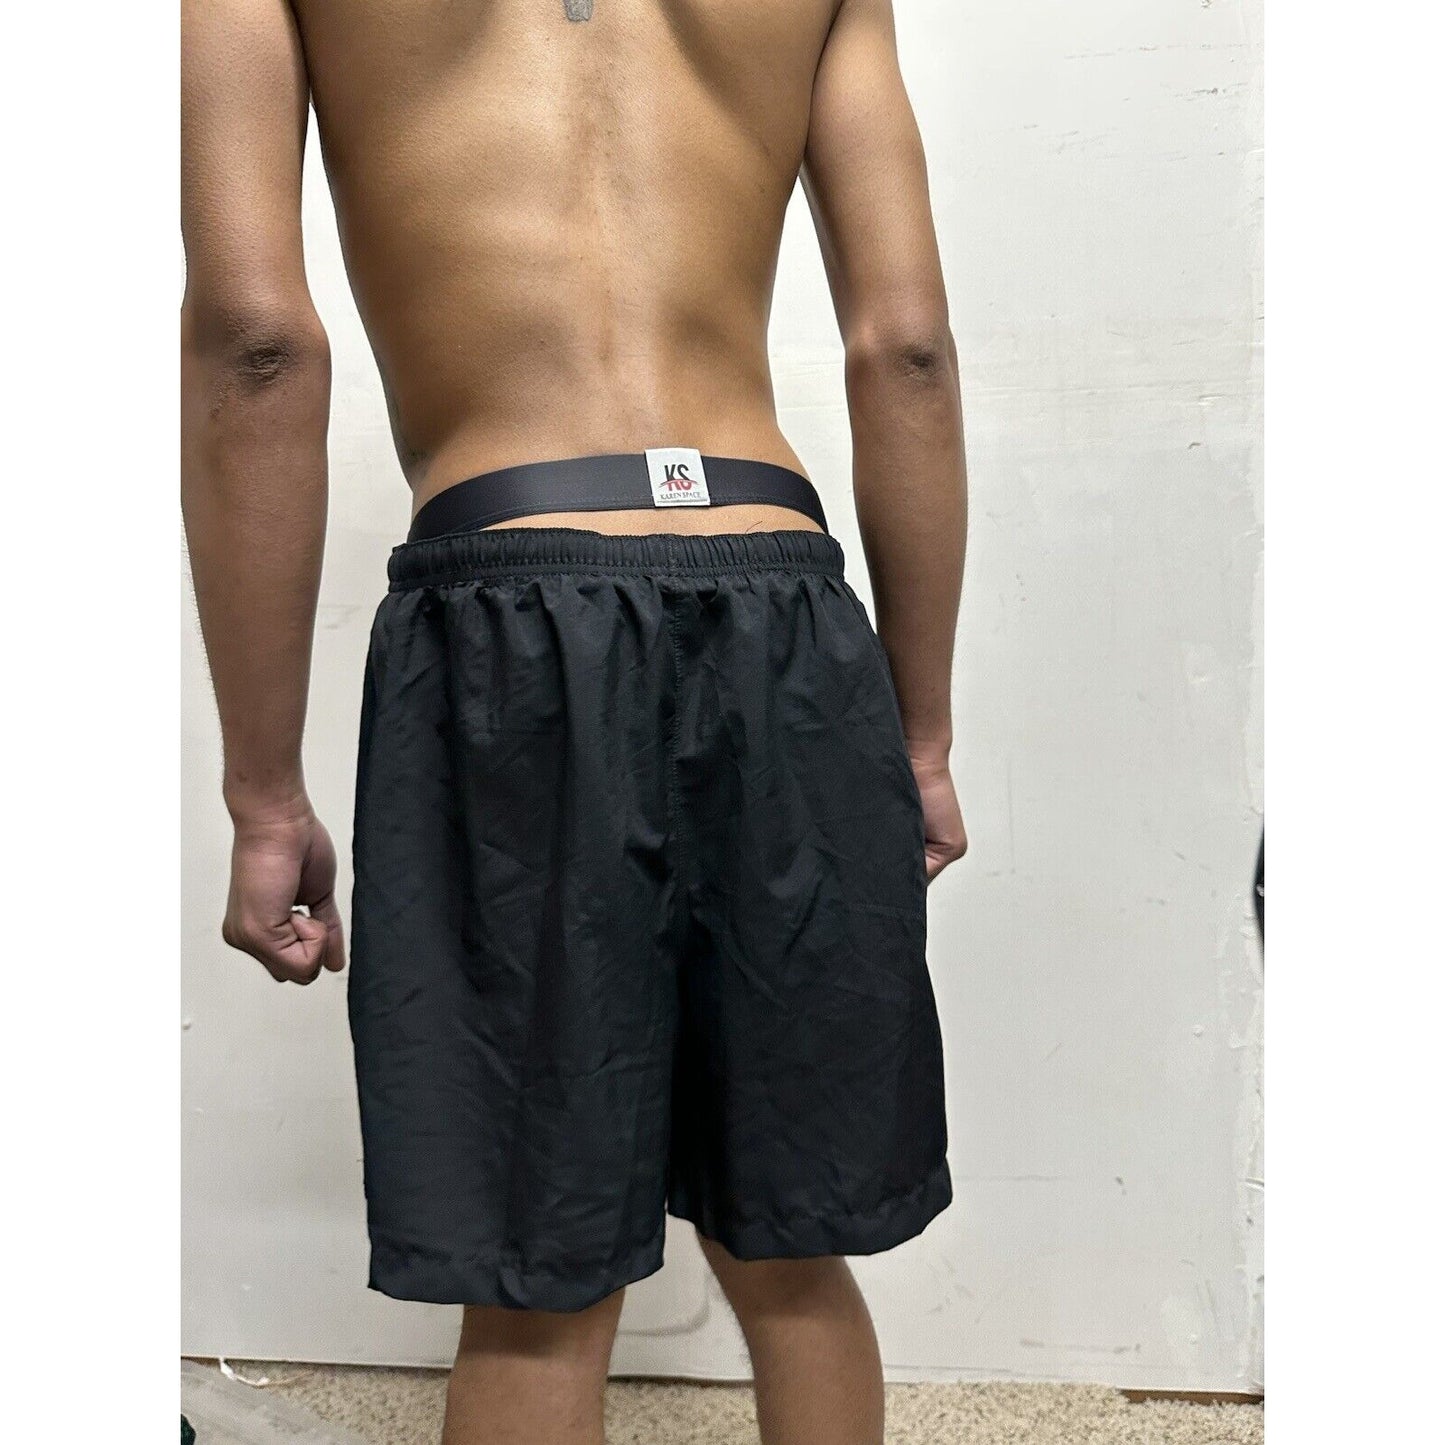 Army black size large physical fitness uniform apfu trunks